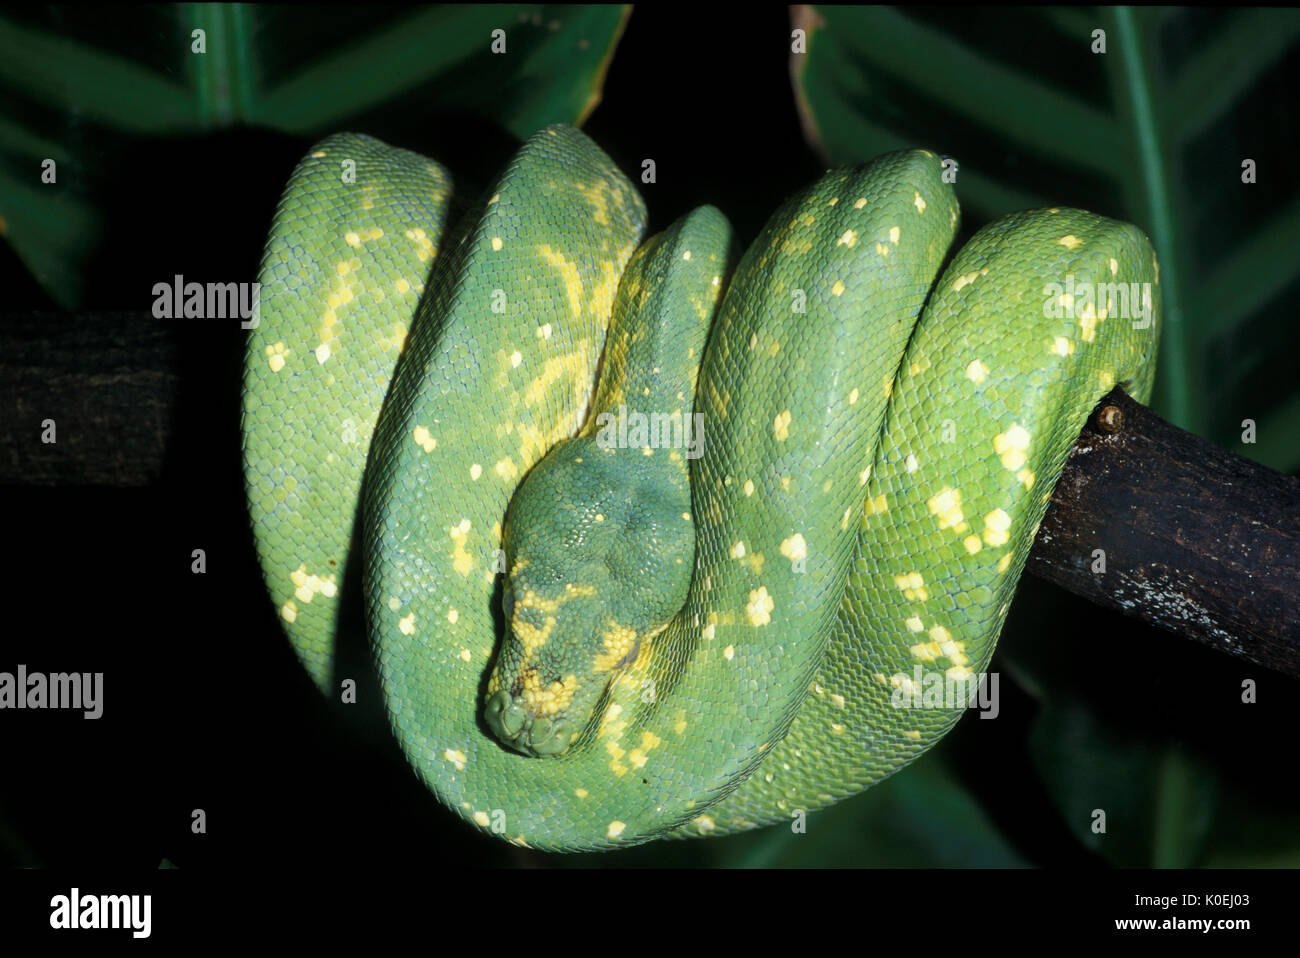 Green Tree Boa Snake, Corallus caninus,  Amazonia, South America, curled around branch Stock Photo